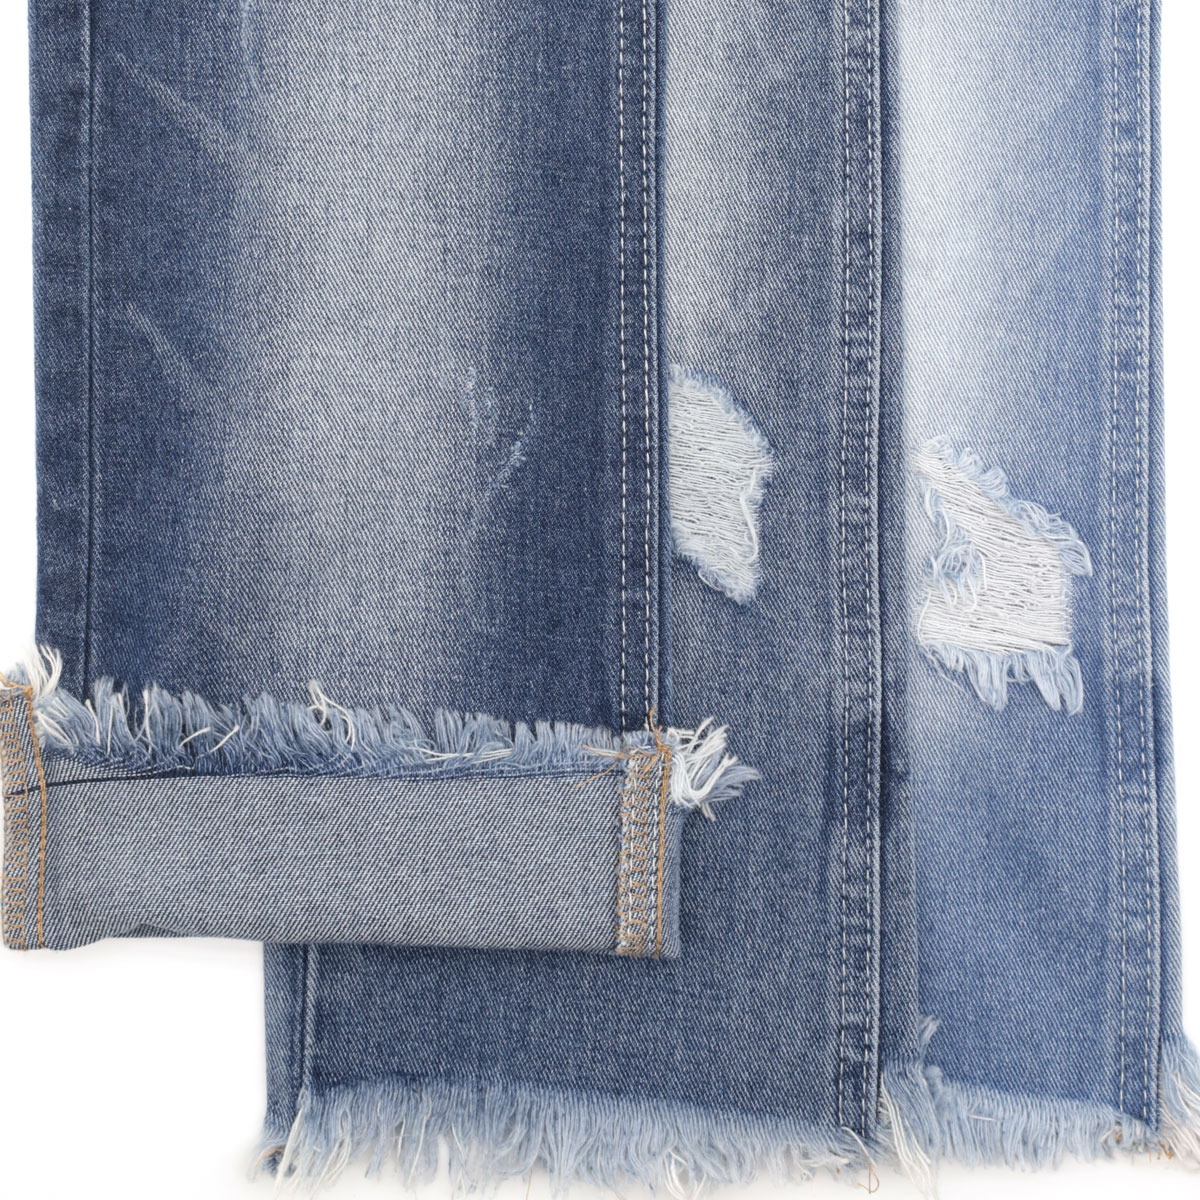 Jeans Fabric Manufacturers - How to Use the Best One for Your Needs 1